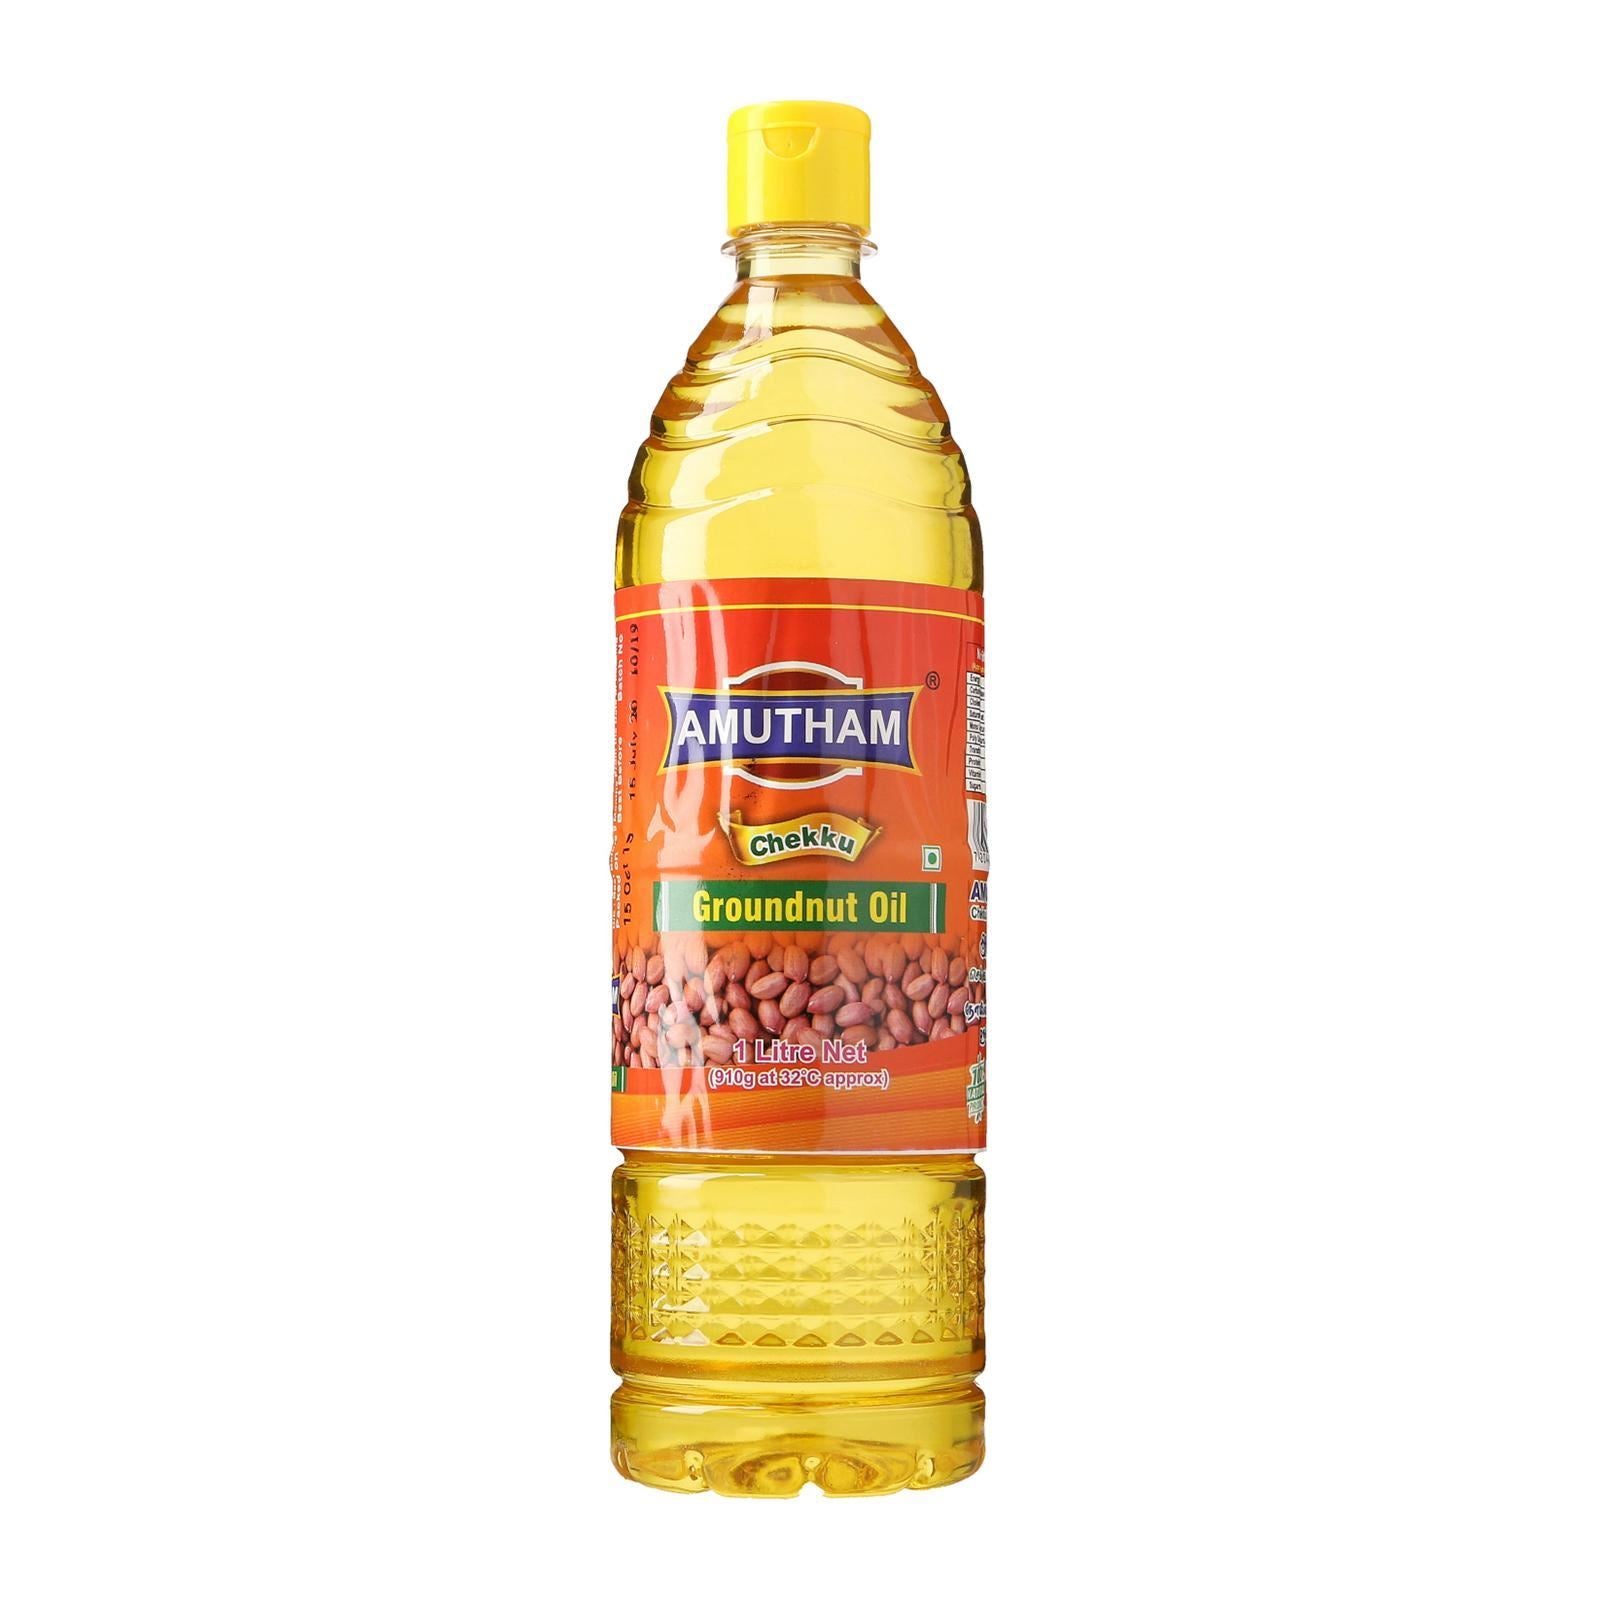 Amutham Cold/Wood Press Groundnut Oil